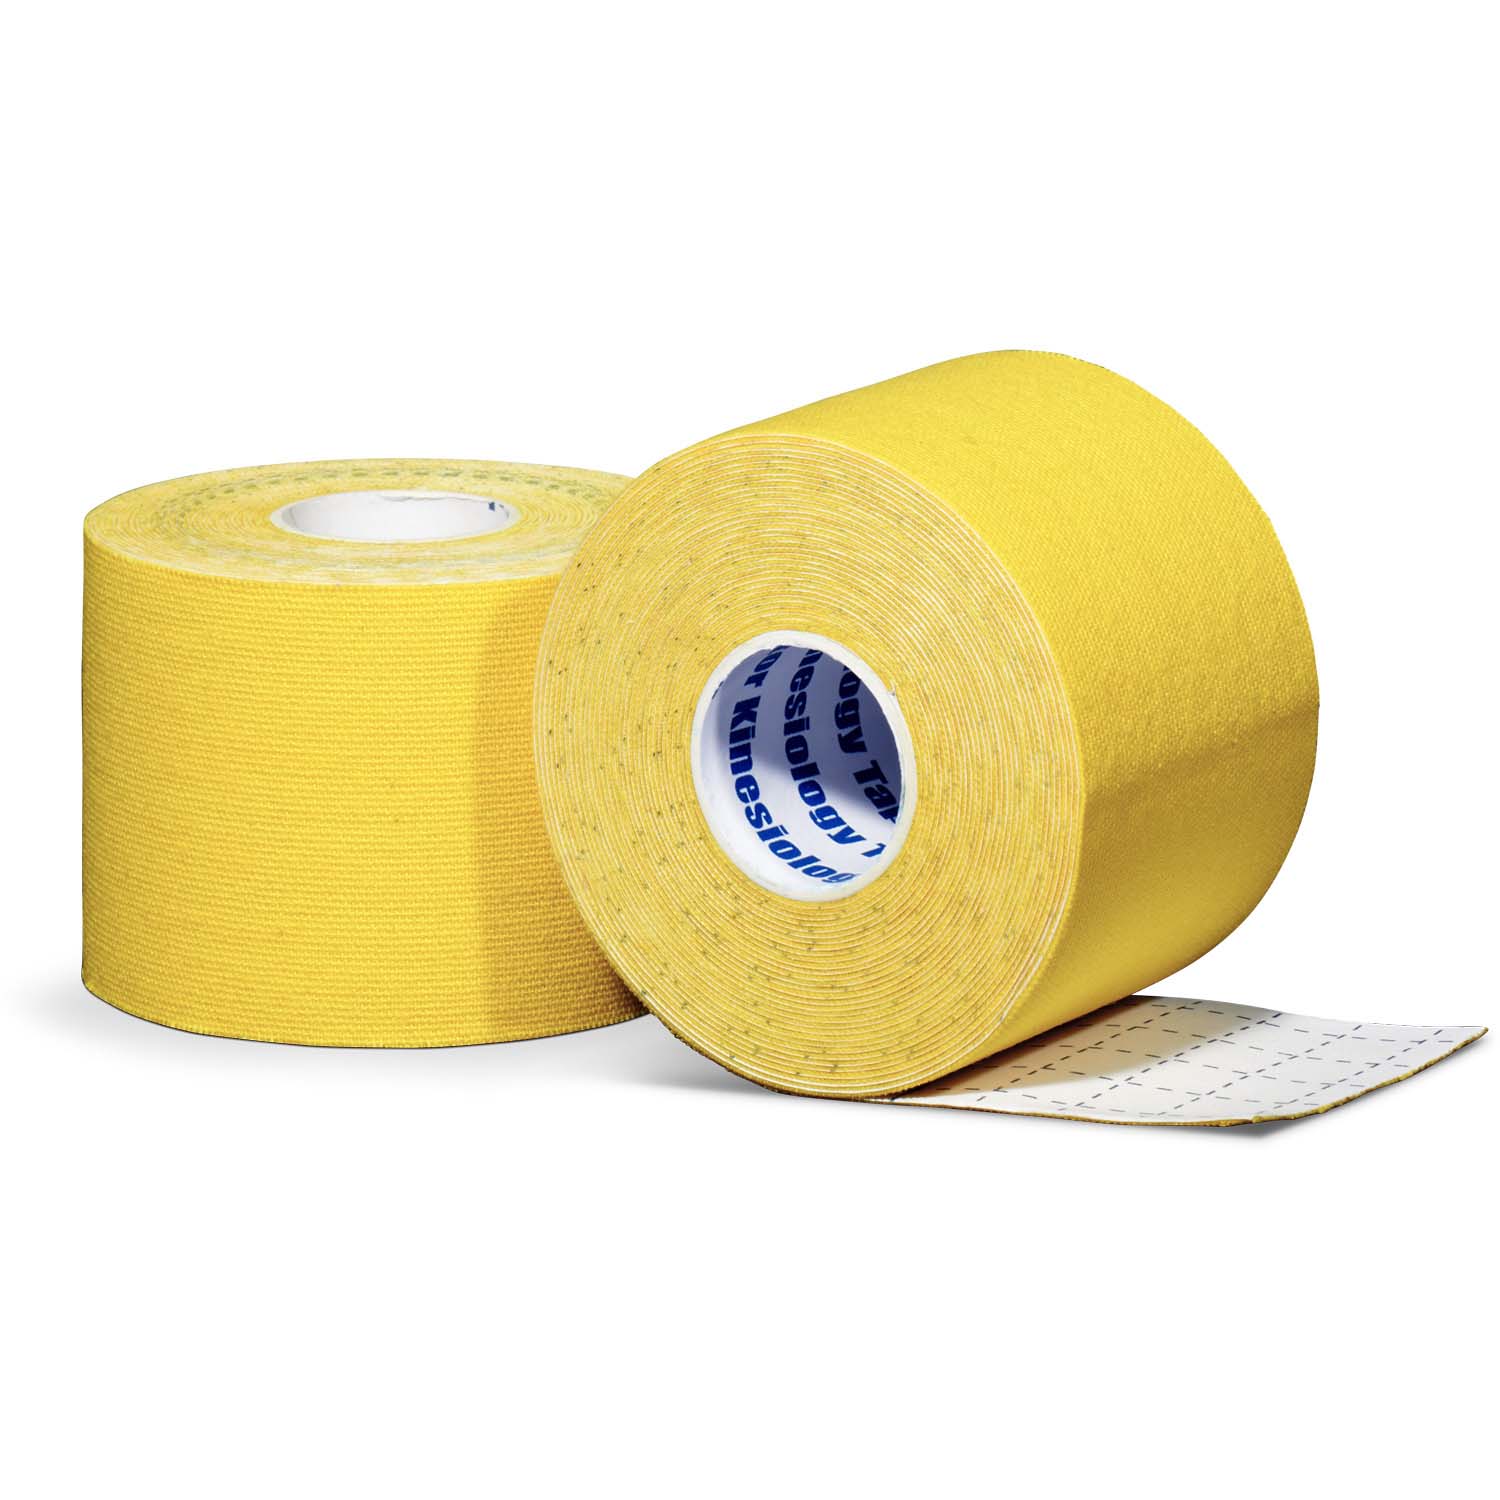 Kinesiology tape per roll yellow front and back view